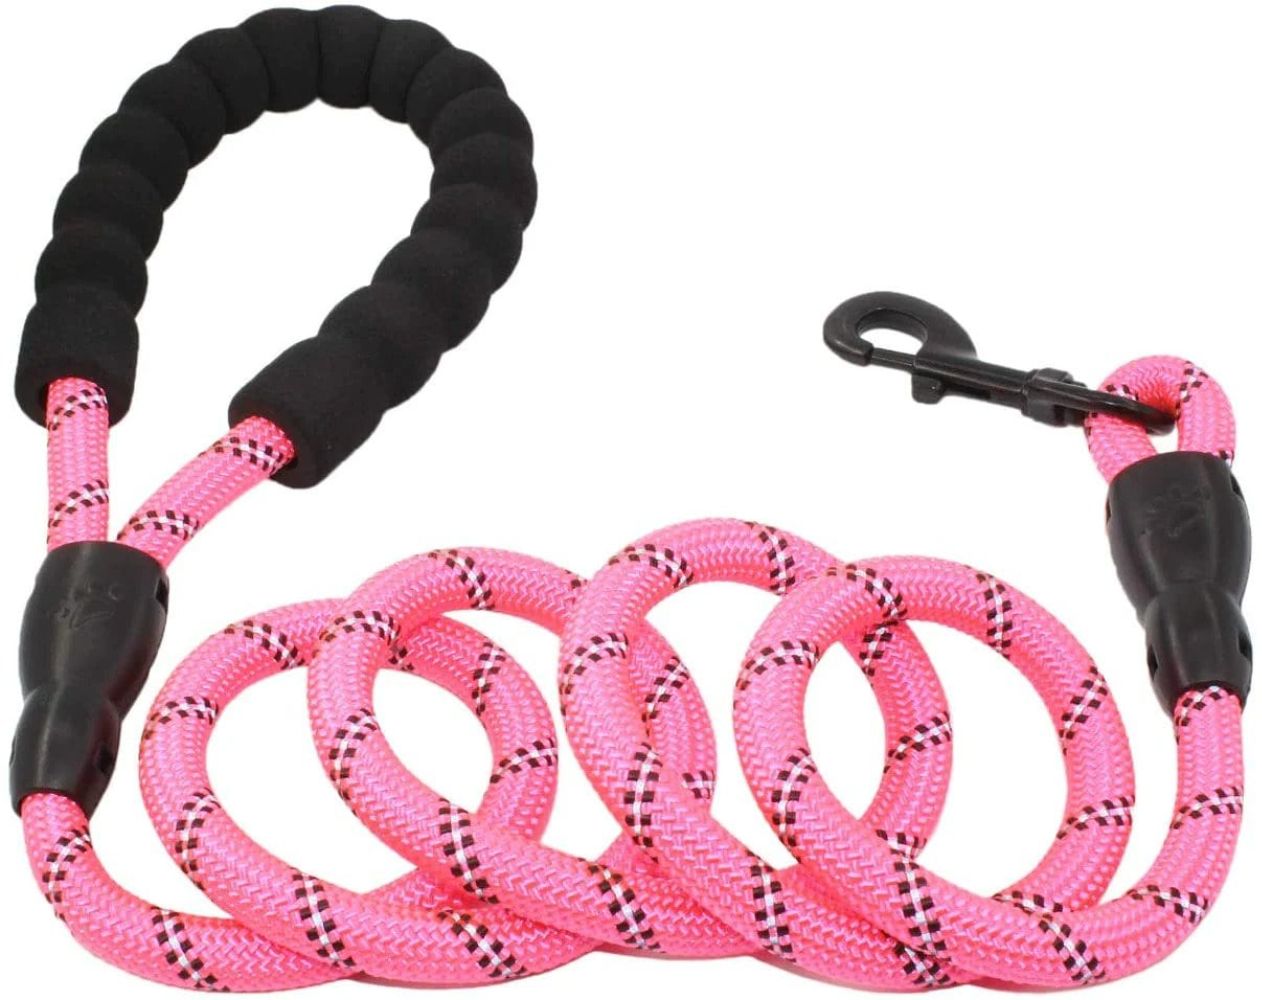 My Doggy Tales Braided Rope Dog Leash Pink